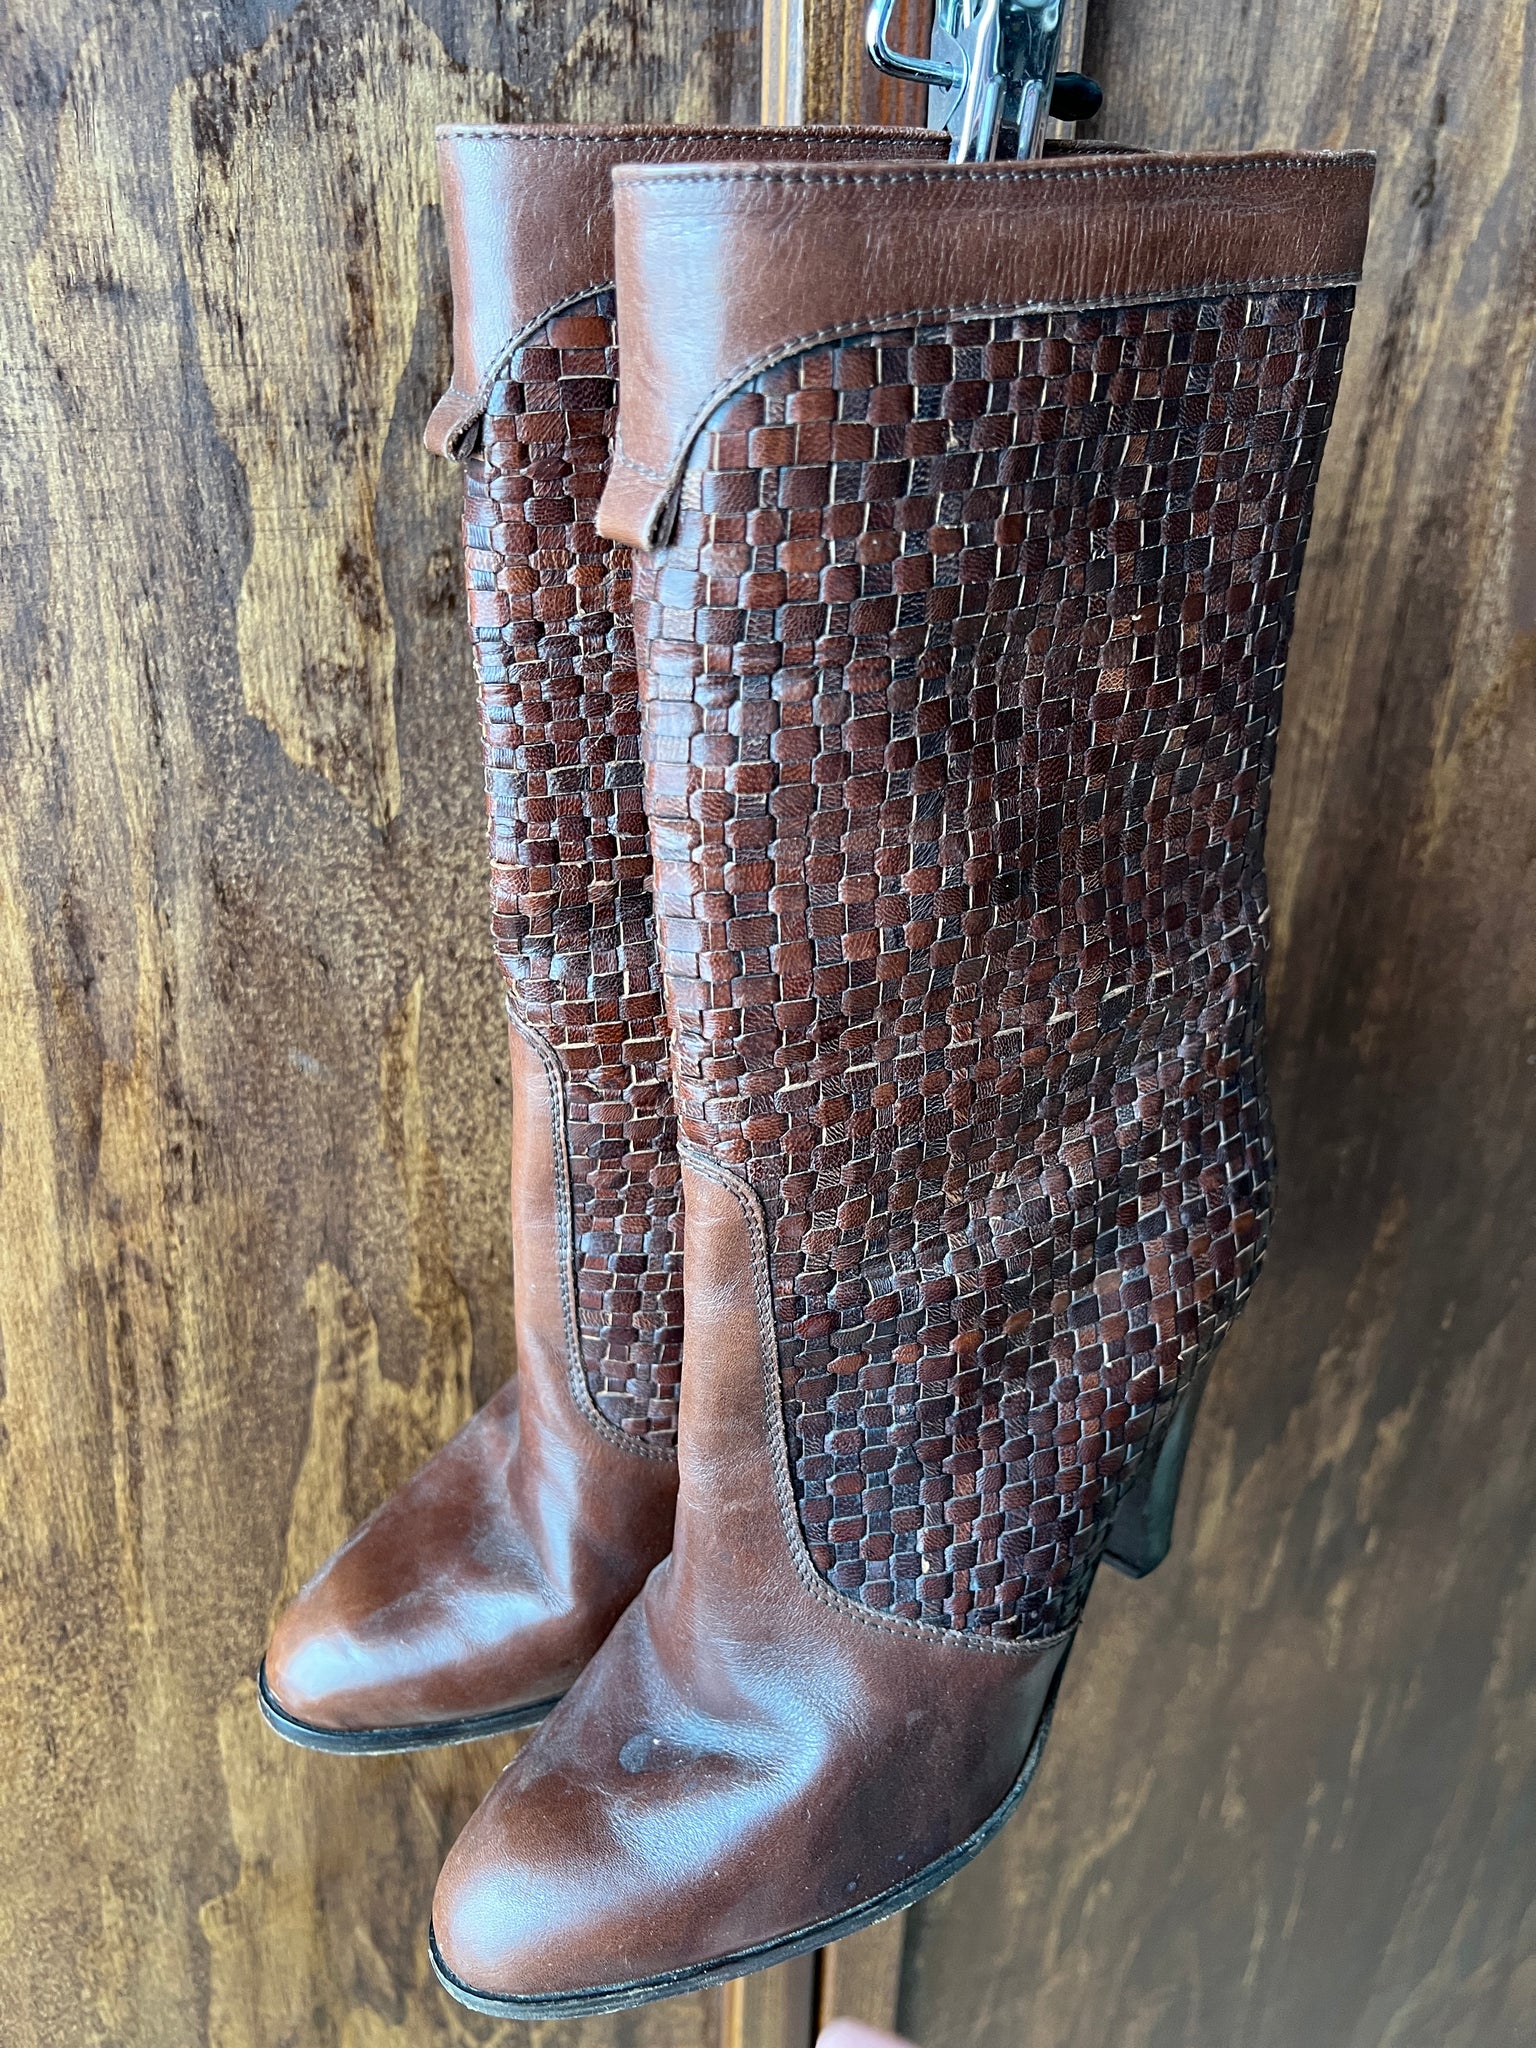 1980s SHOES-BOOTS- Brown woven leather heel